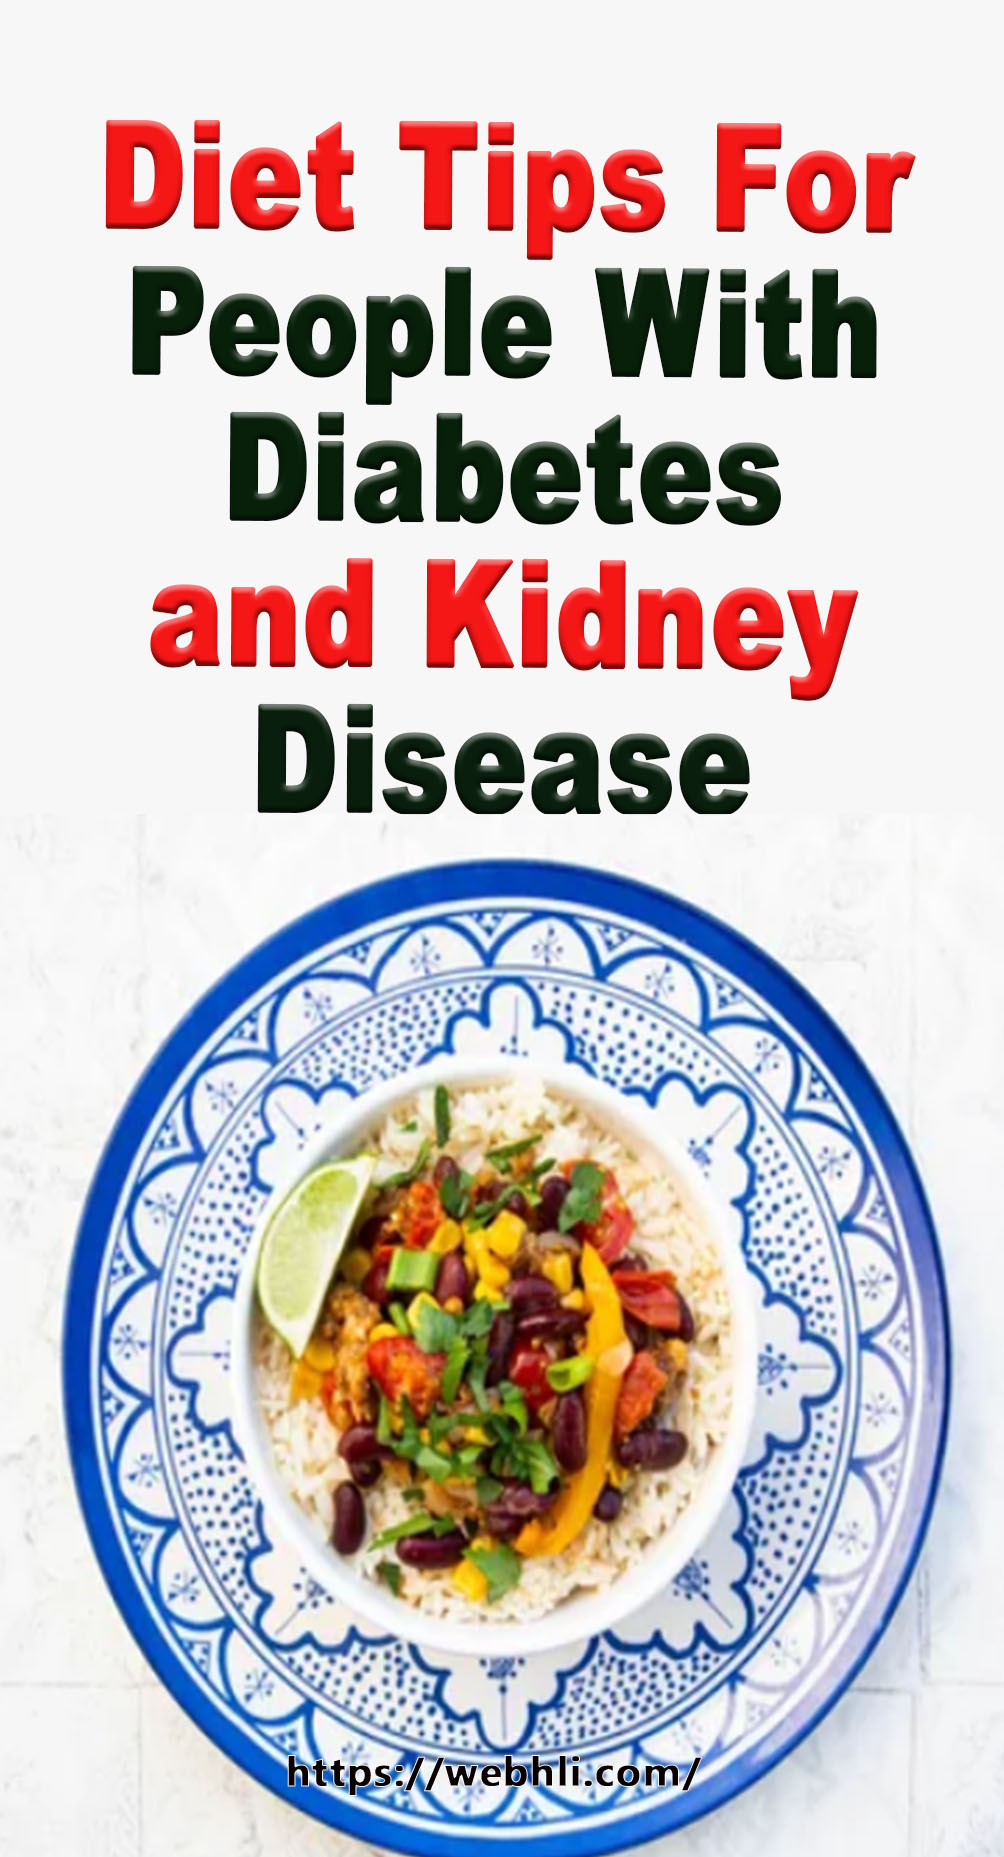 Diet Tips For People With Diabetes and Kidney Disease | Healthy Lifestyle